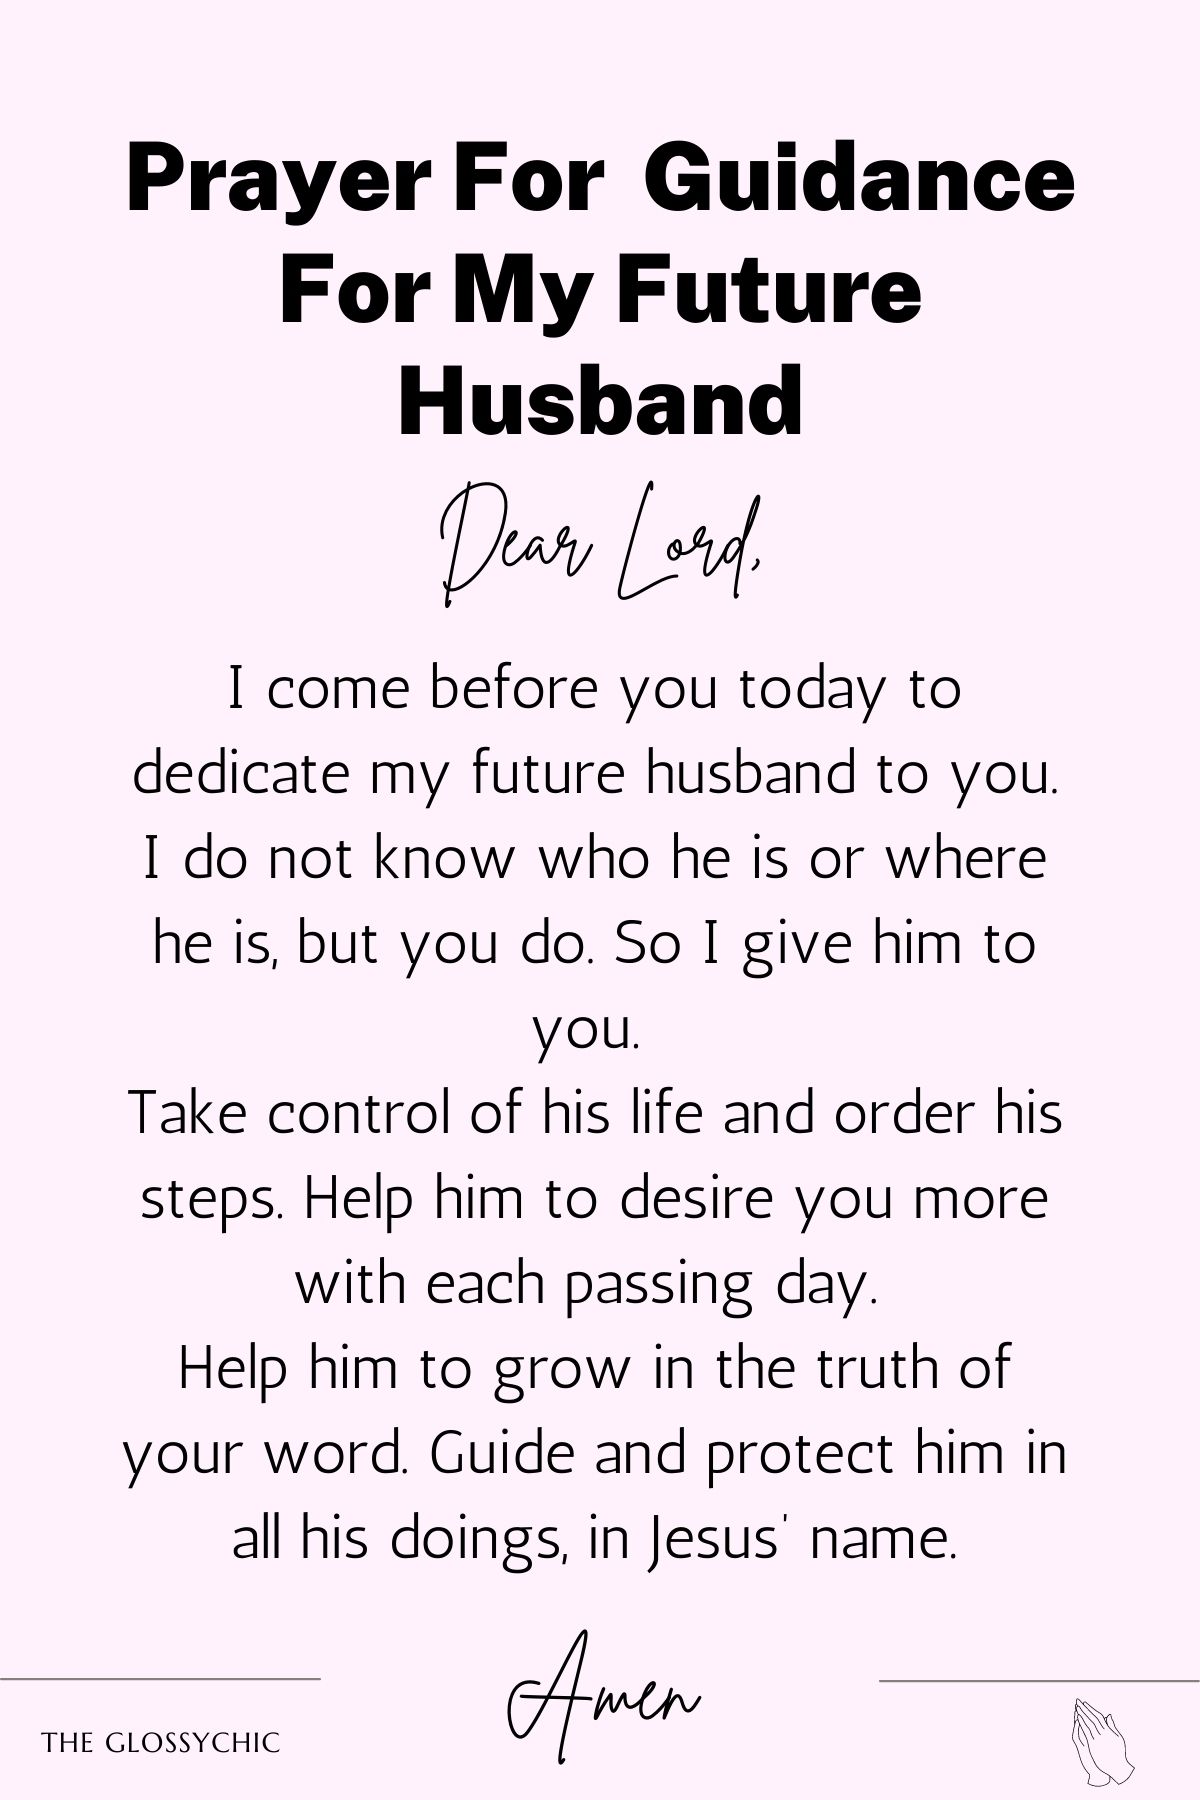 Prayer for guidance for my future husband